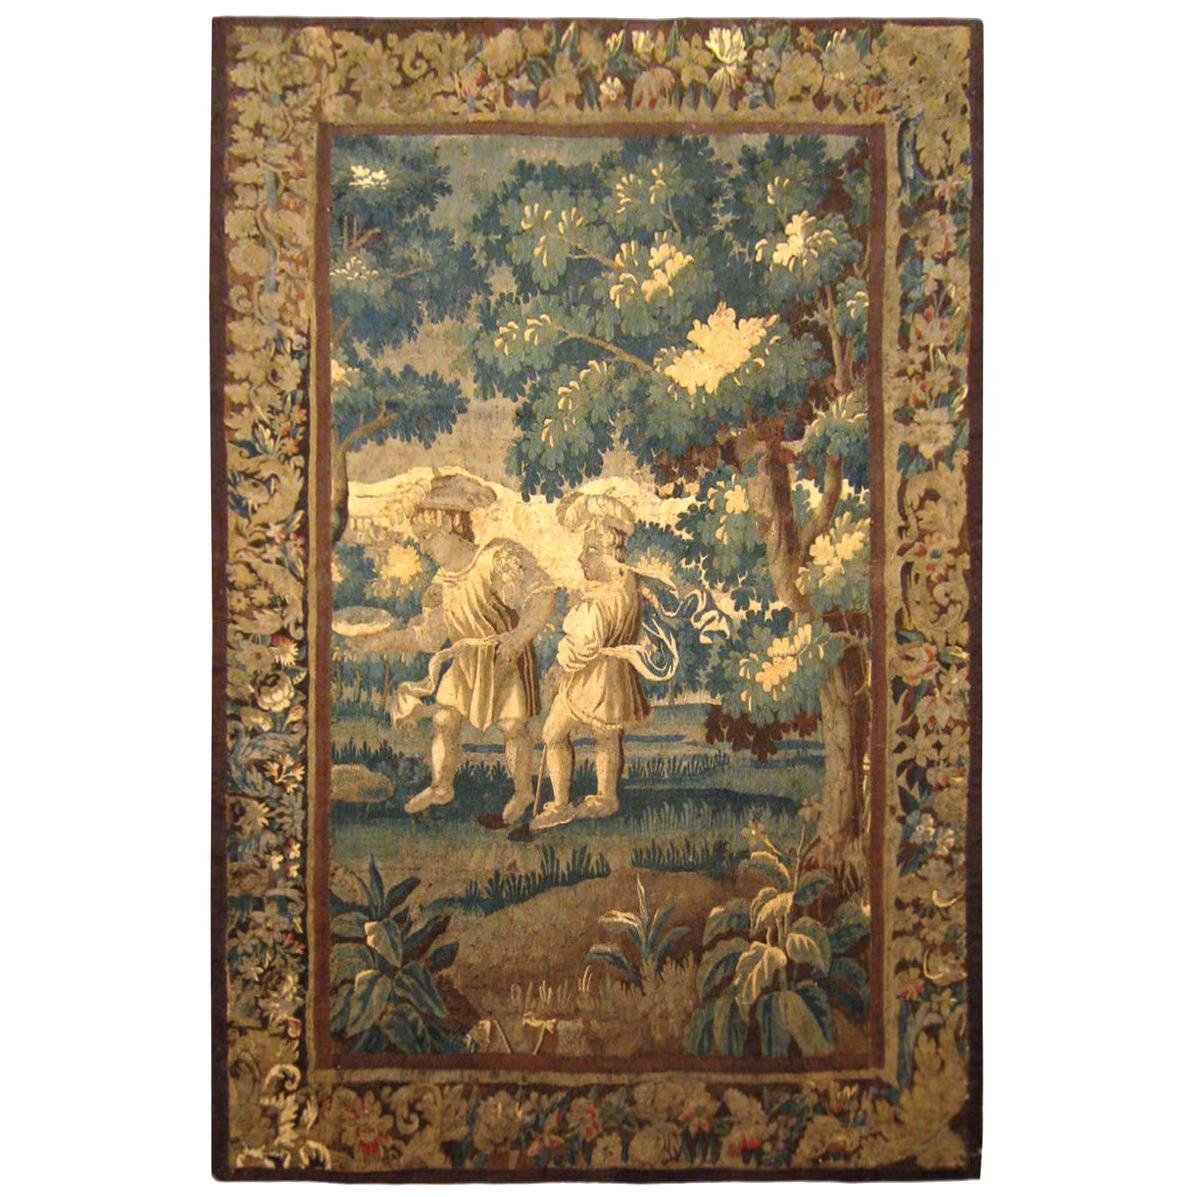 17th Century Flemish Rustic Verdure Tapestry, with Youths at Play in the Woods